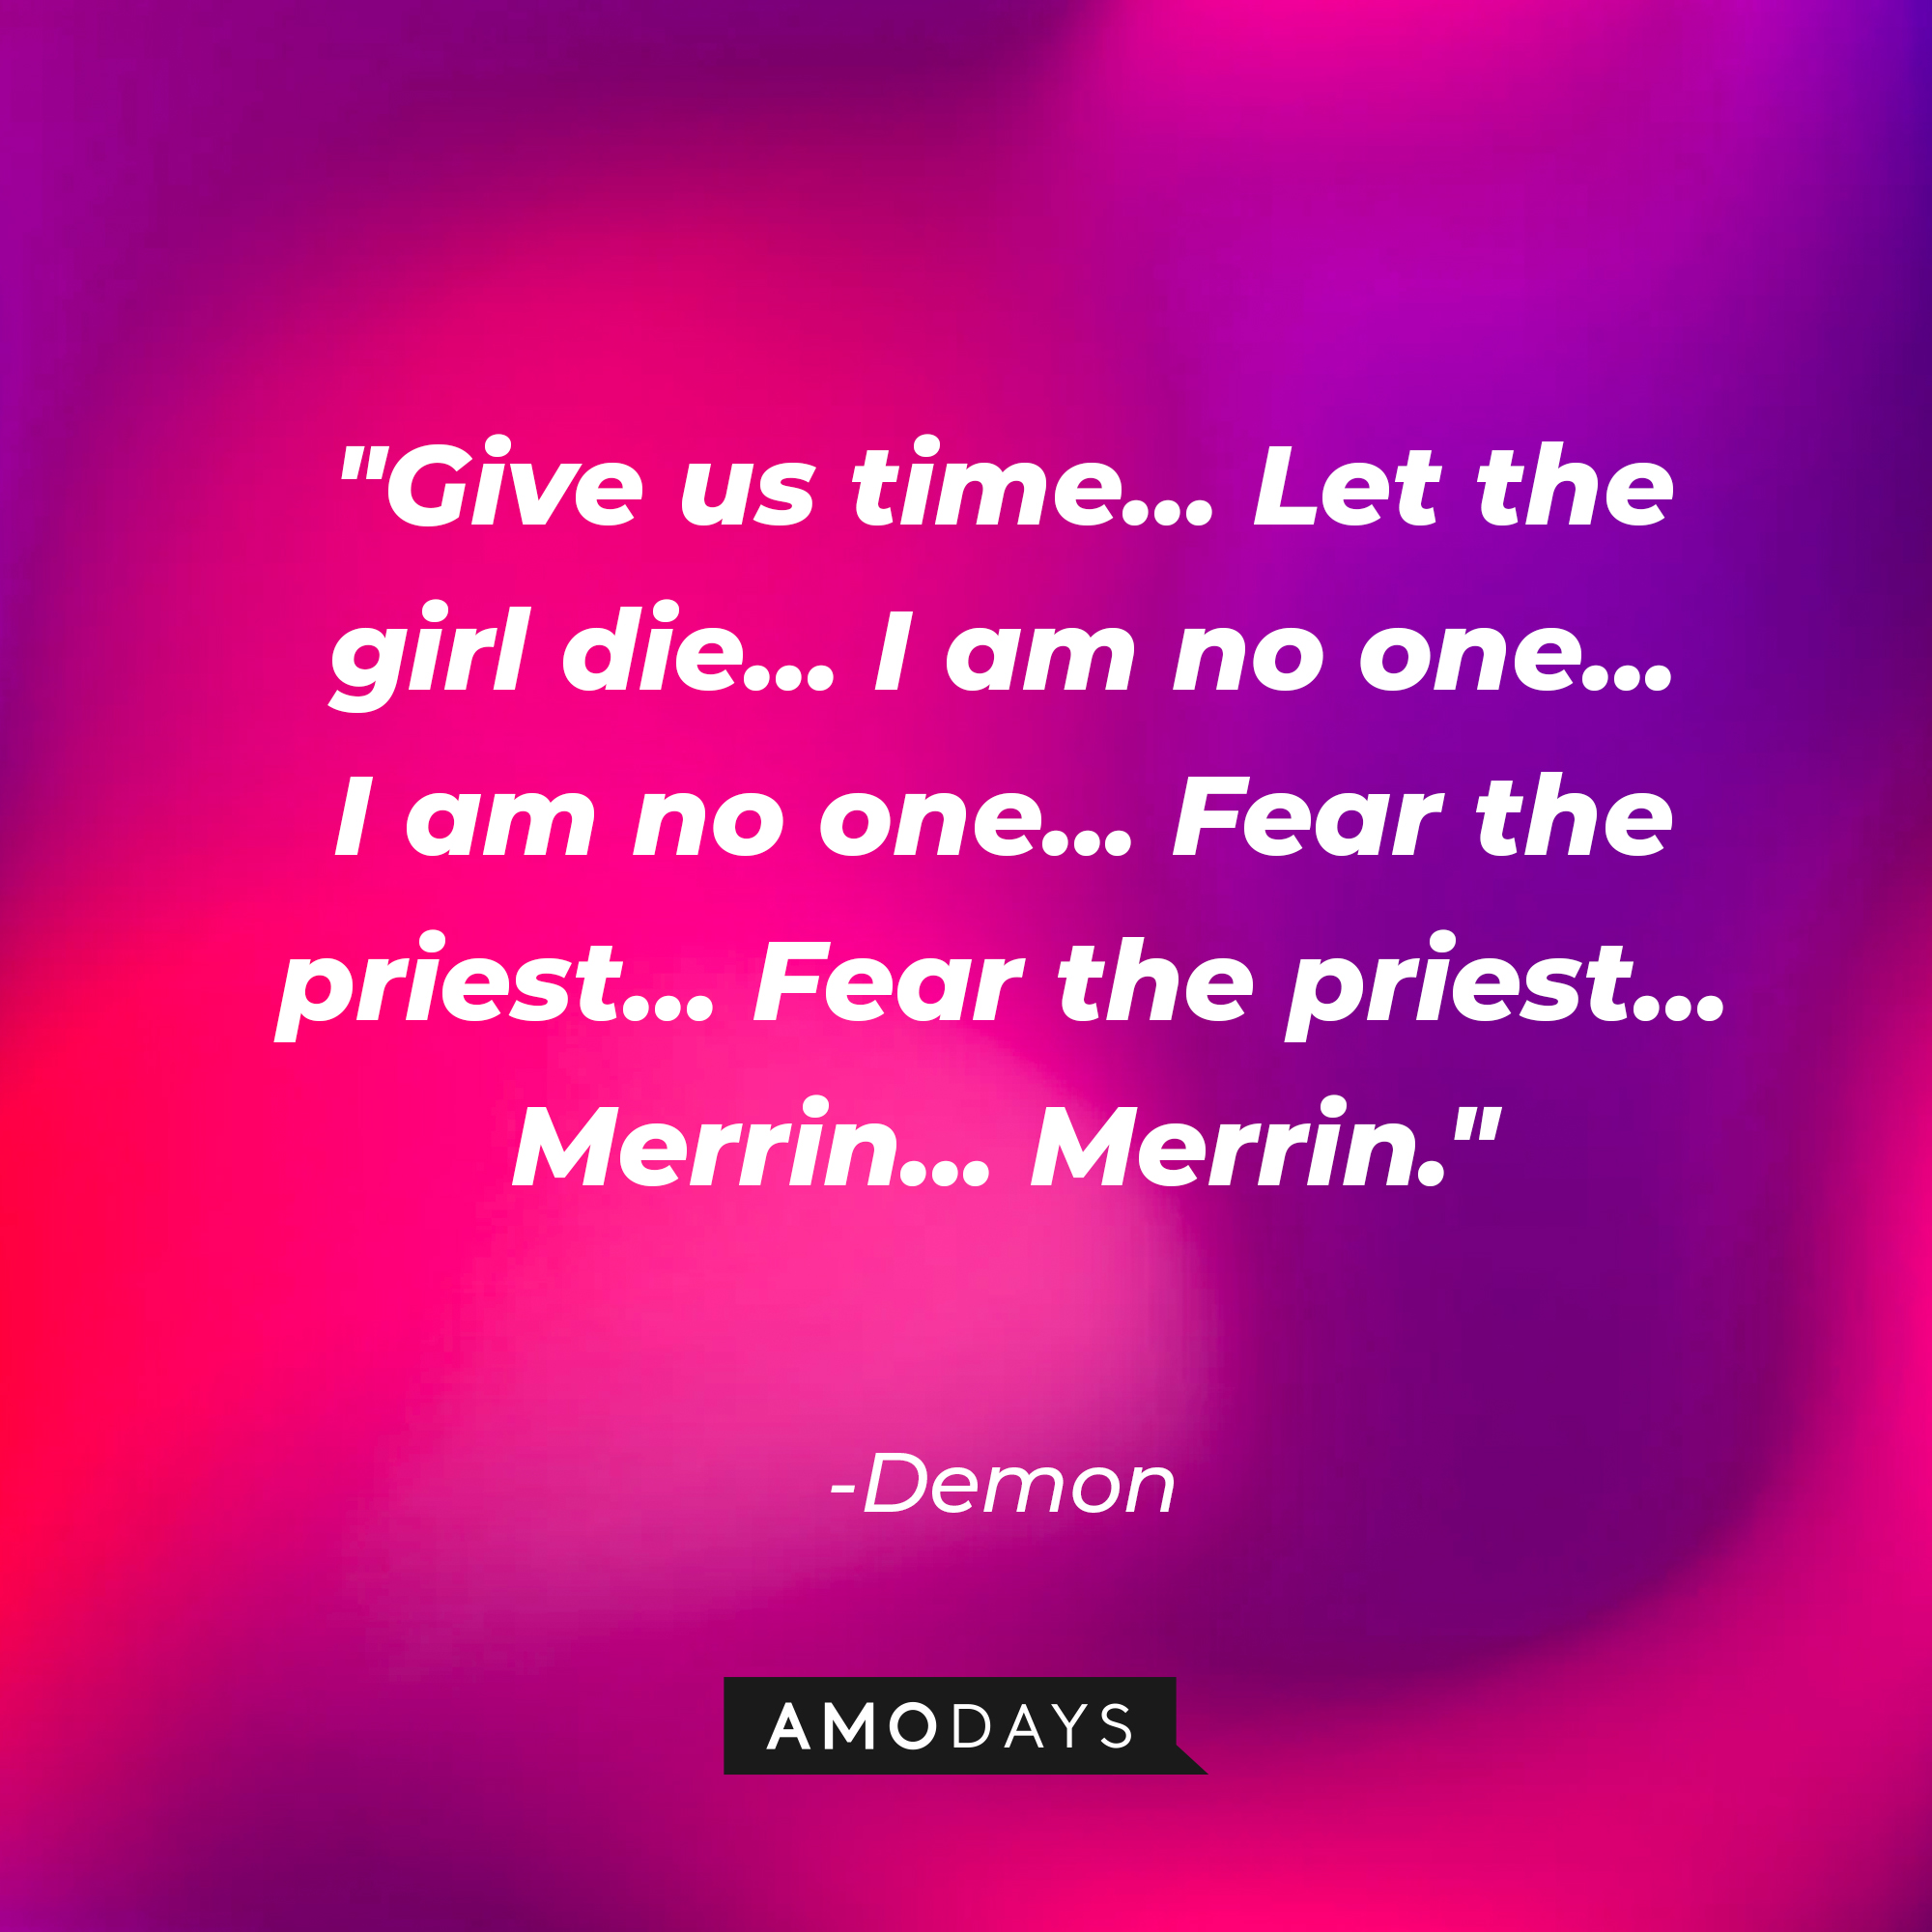 The Demon's quote: "Give us time... Let the girl die... I am no one... I am no one... Fear the priest... Fear the priest... Merrin... Merrin." | Source: AmoDAys